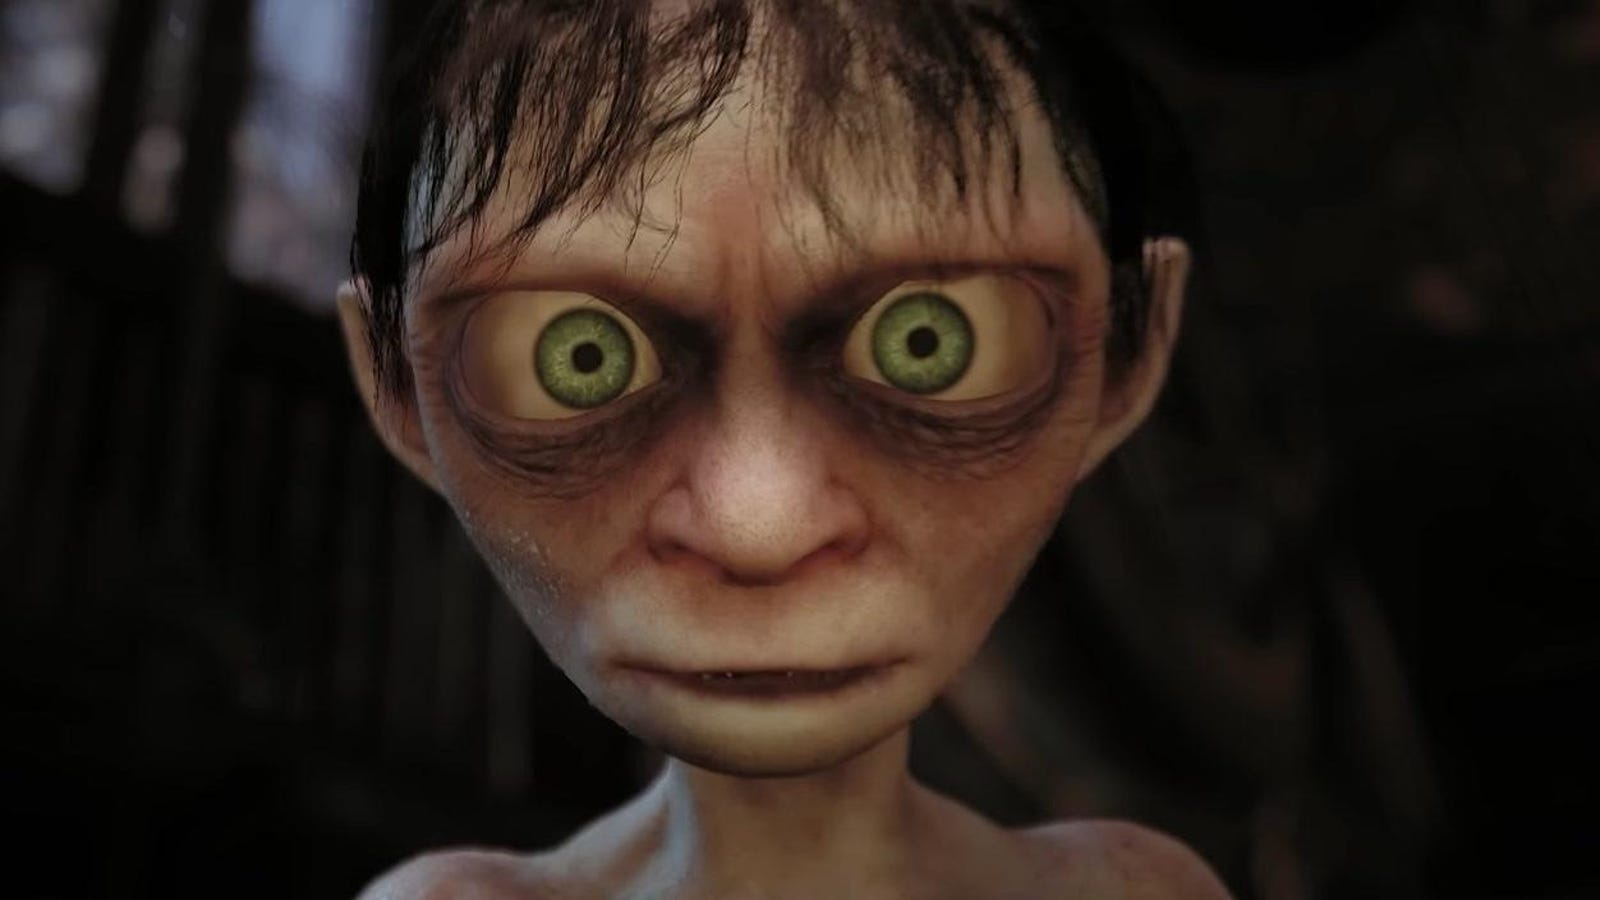 The Lord of the Rings: Gollum gets new trailer at The Game Awards